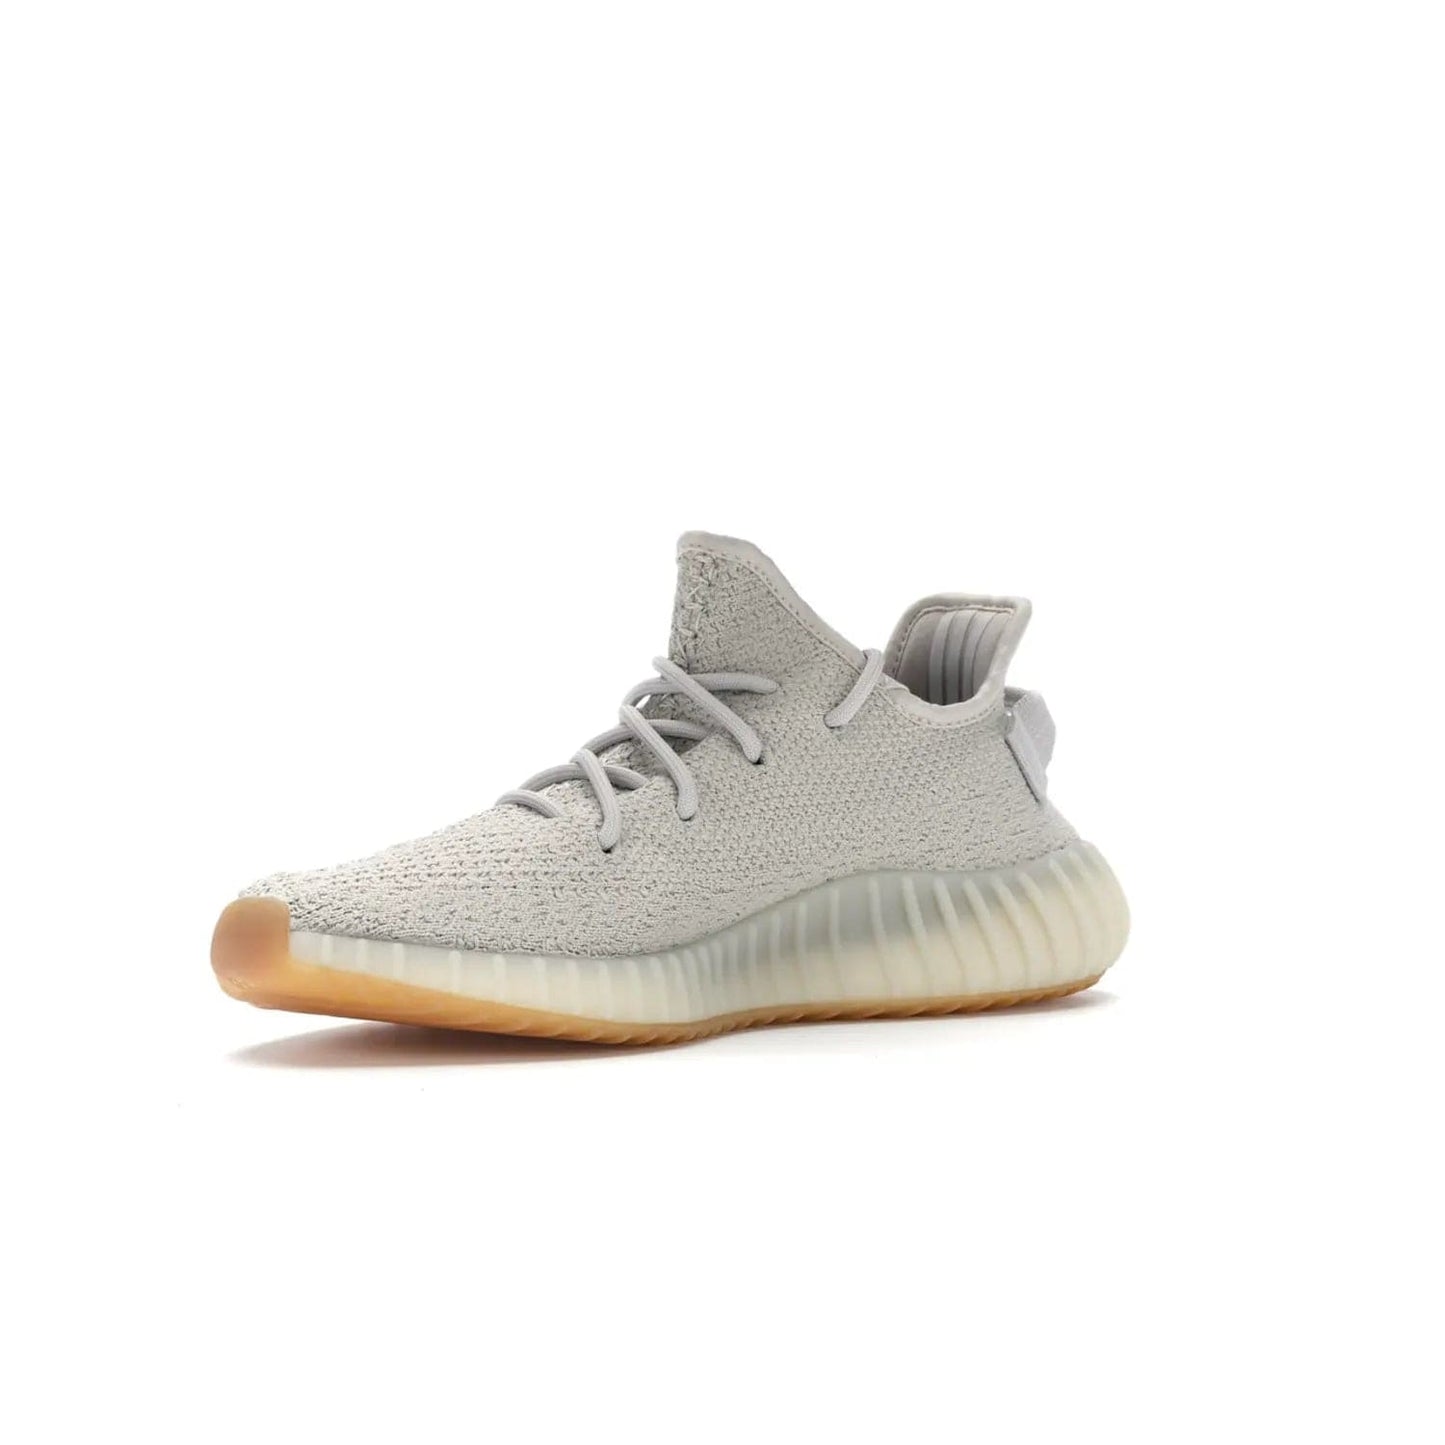 adidas Yeezy Boost 350 V2 Sesame - Image 16 - Only at www.BallersClubKickz.com - Introducing the adidas Yeezy Boost 350 V2 Sesame. Featuring a sesame upper, midsole and gum sole for a sleek silhouette. Cop the stylish sneaker released in November 2018.